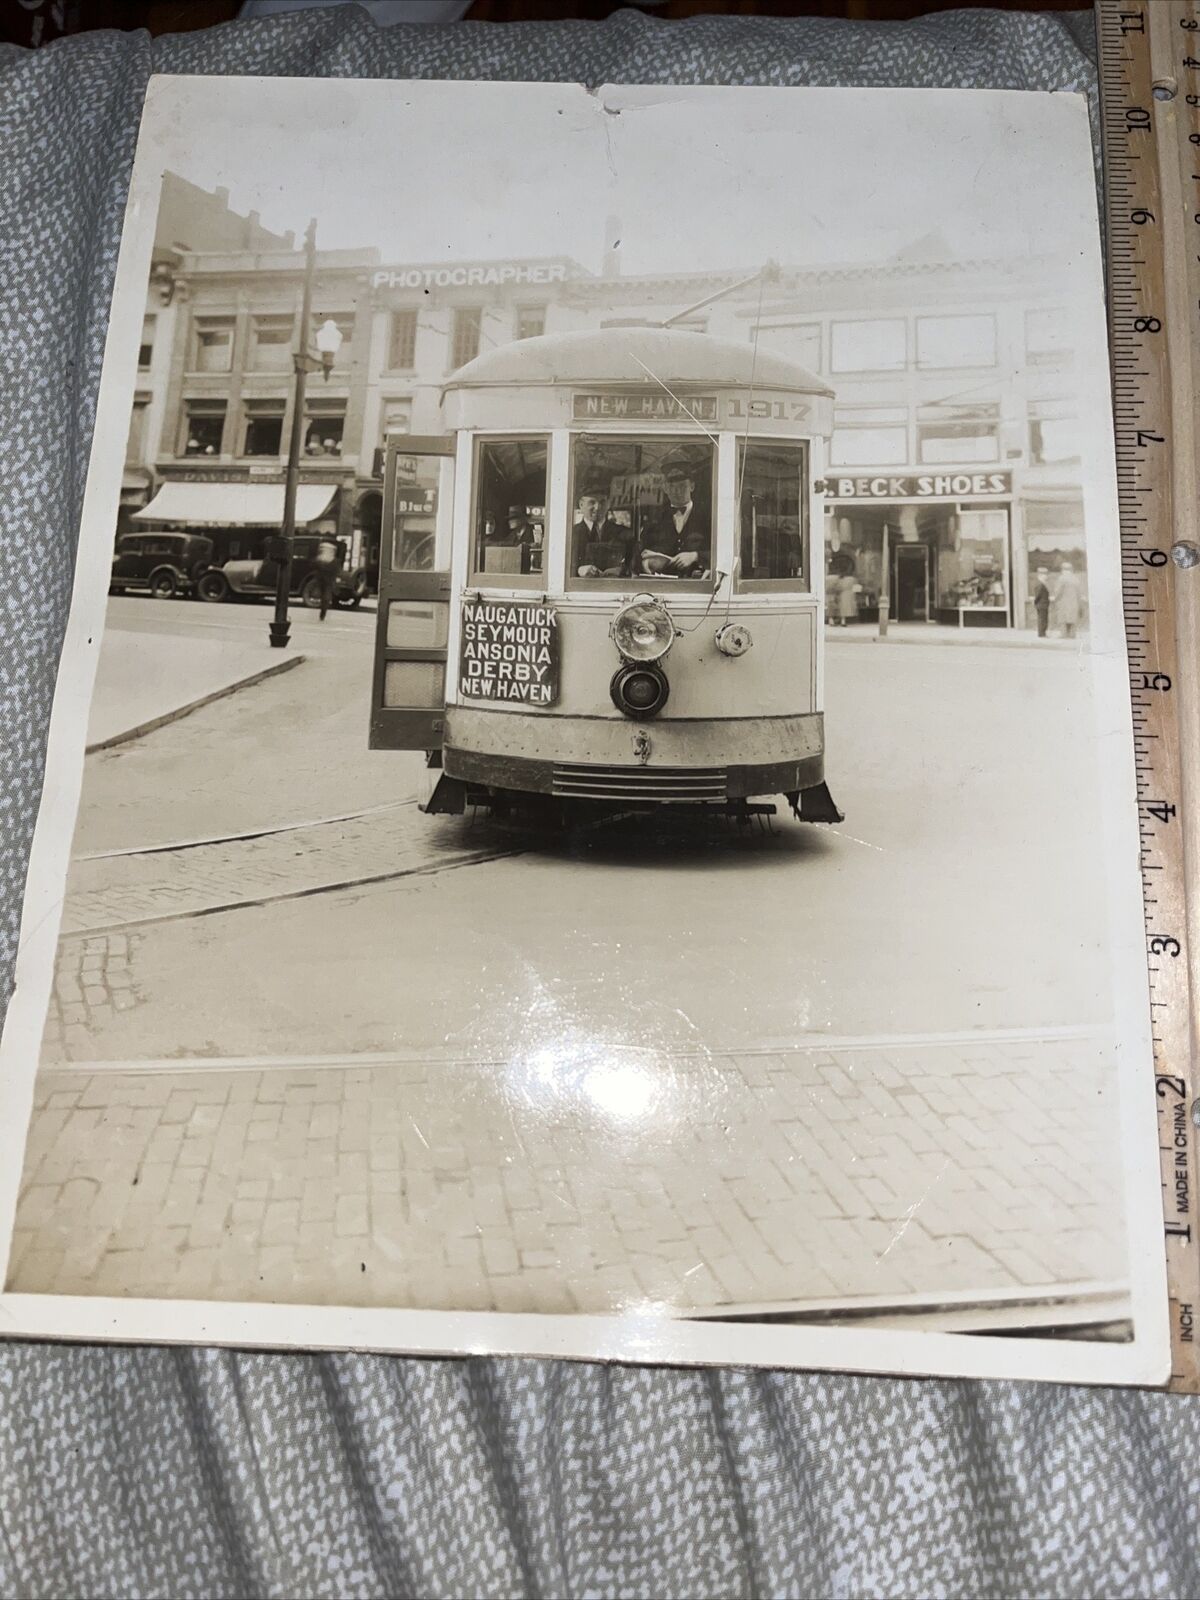 Antique New Haven 1917 Trolley Photo: Naugatuck Seymour Ansonia Derby CT History